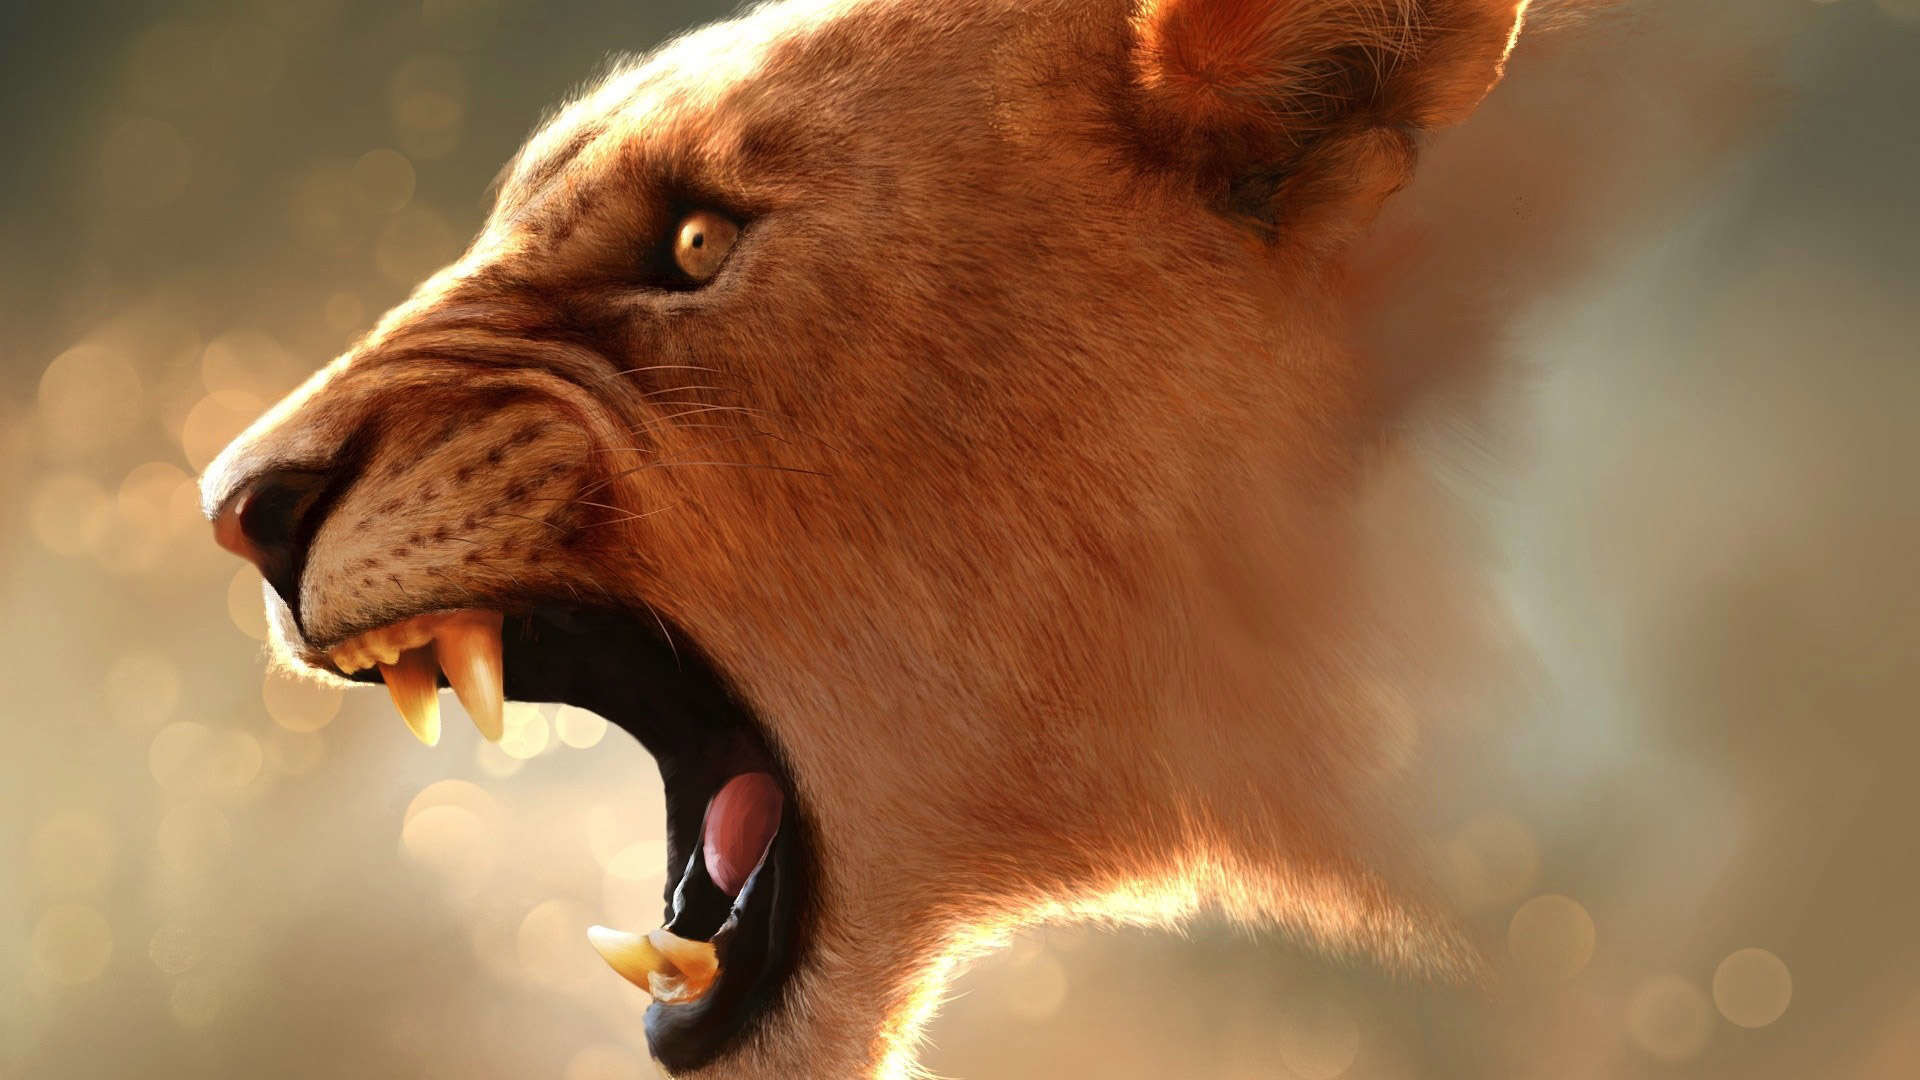 Angry Lion Wallpaper 1080p 
 Data Src Angry Lion Eyes - Angry Lion Lion Images Hd 1080p - HD Wallpaper 